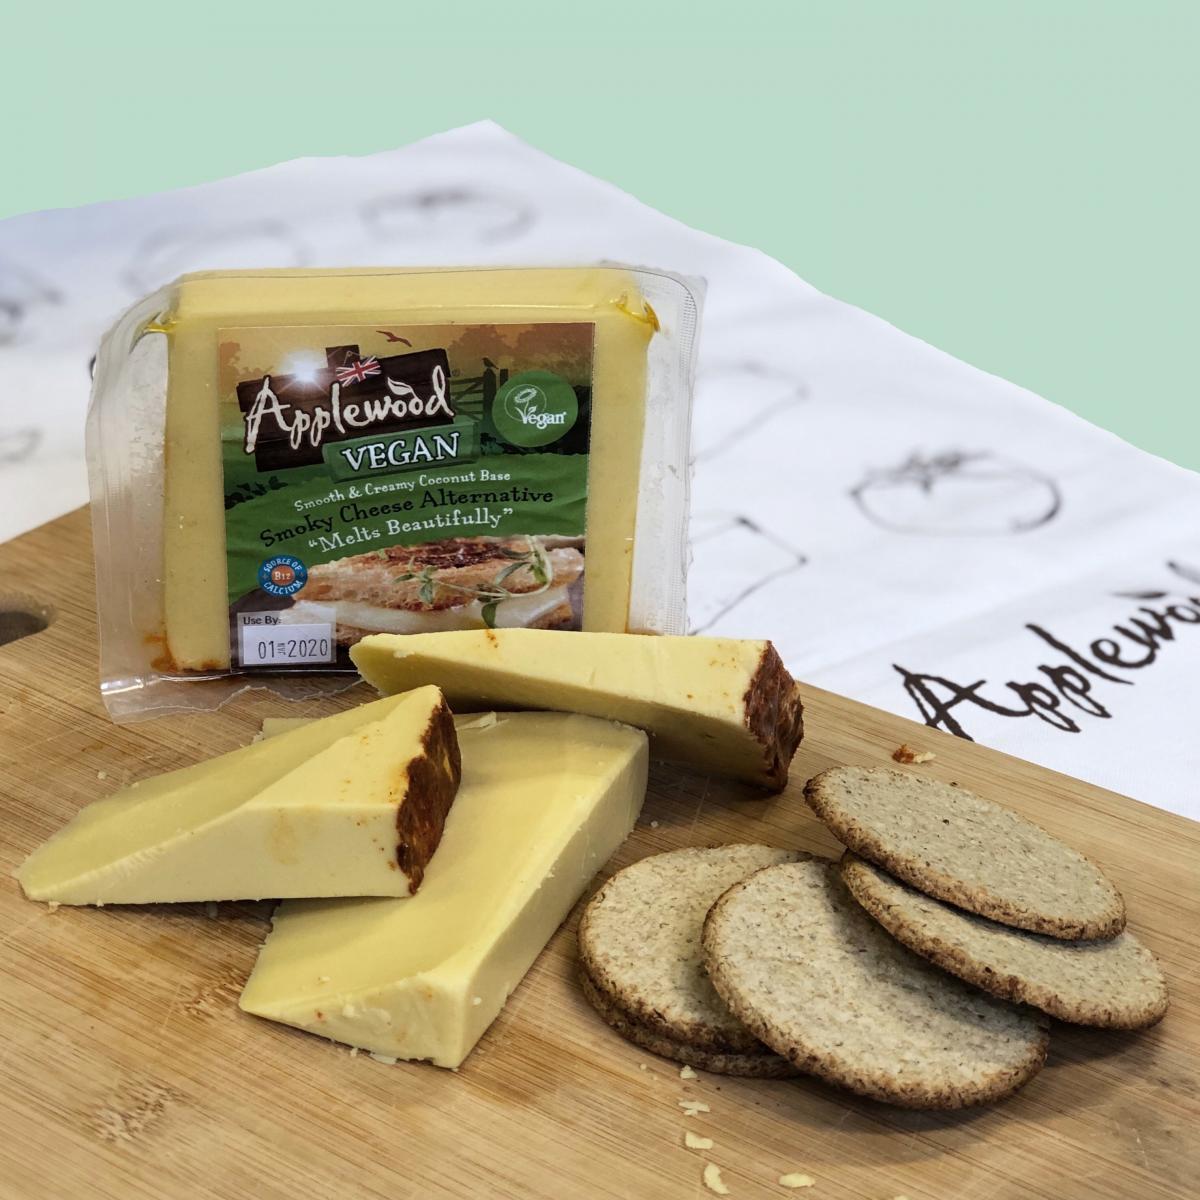 Applewood cheese with crackers